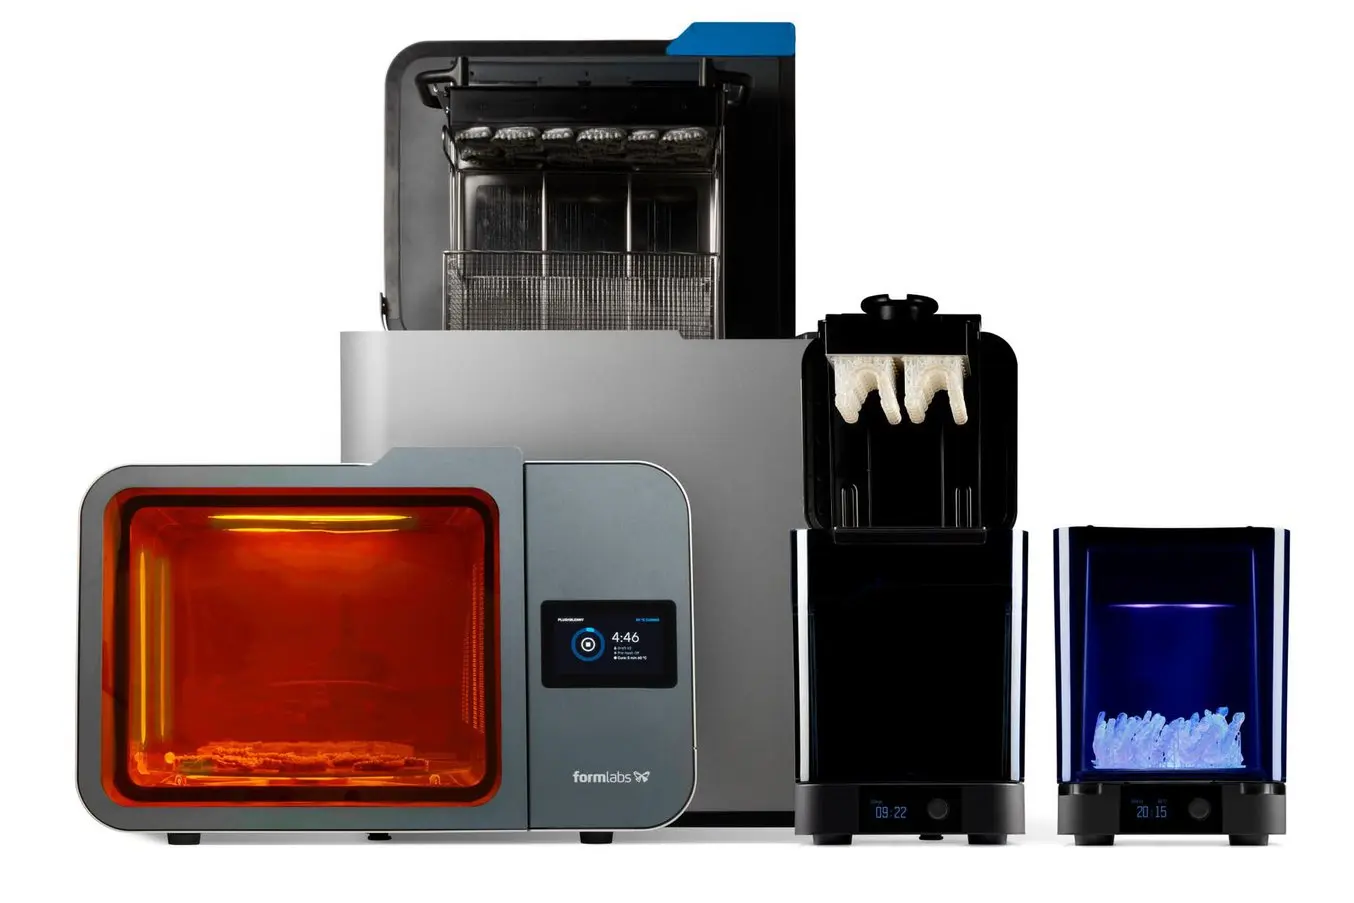 Formlabs' post-processing solutions